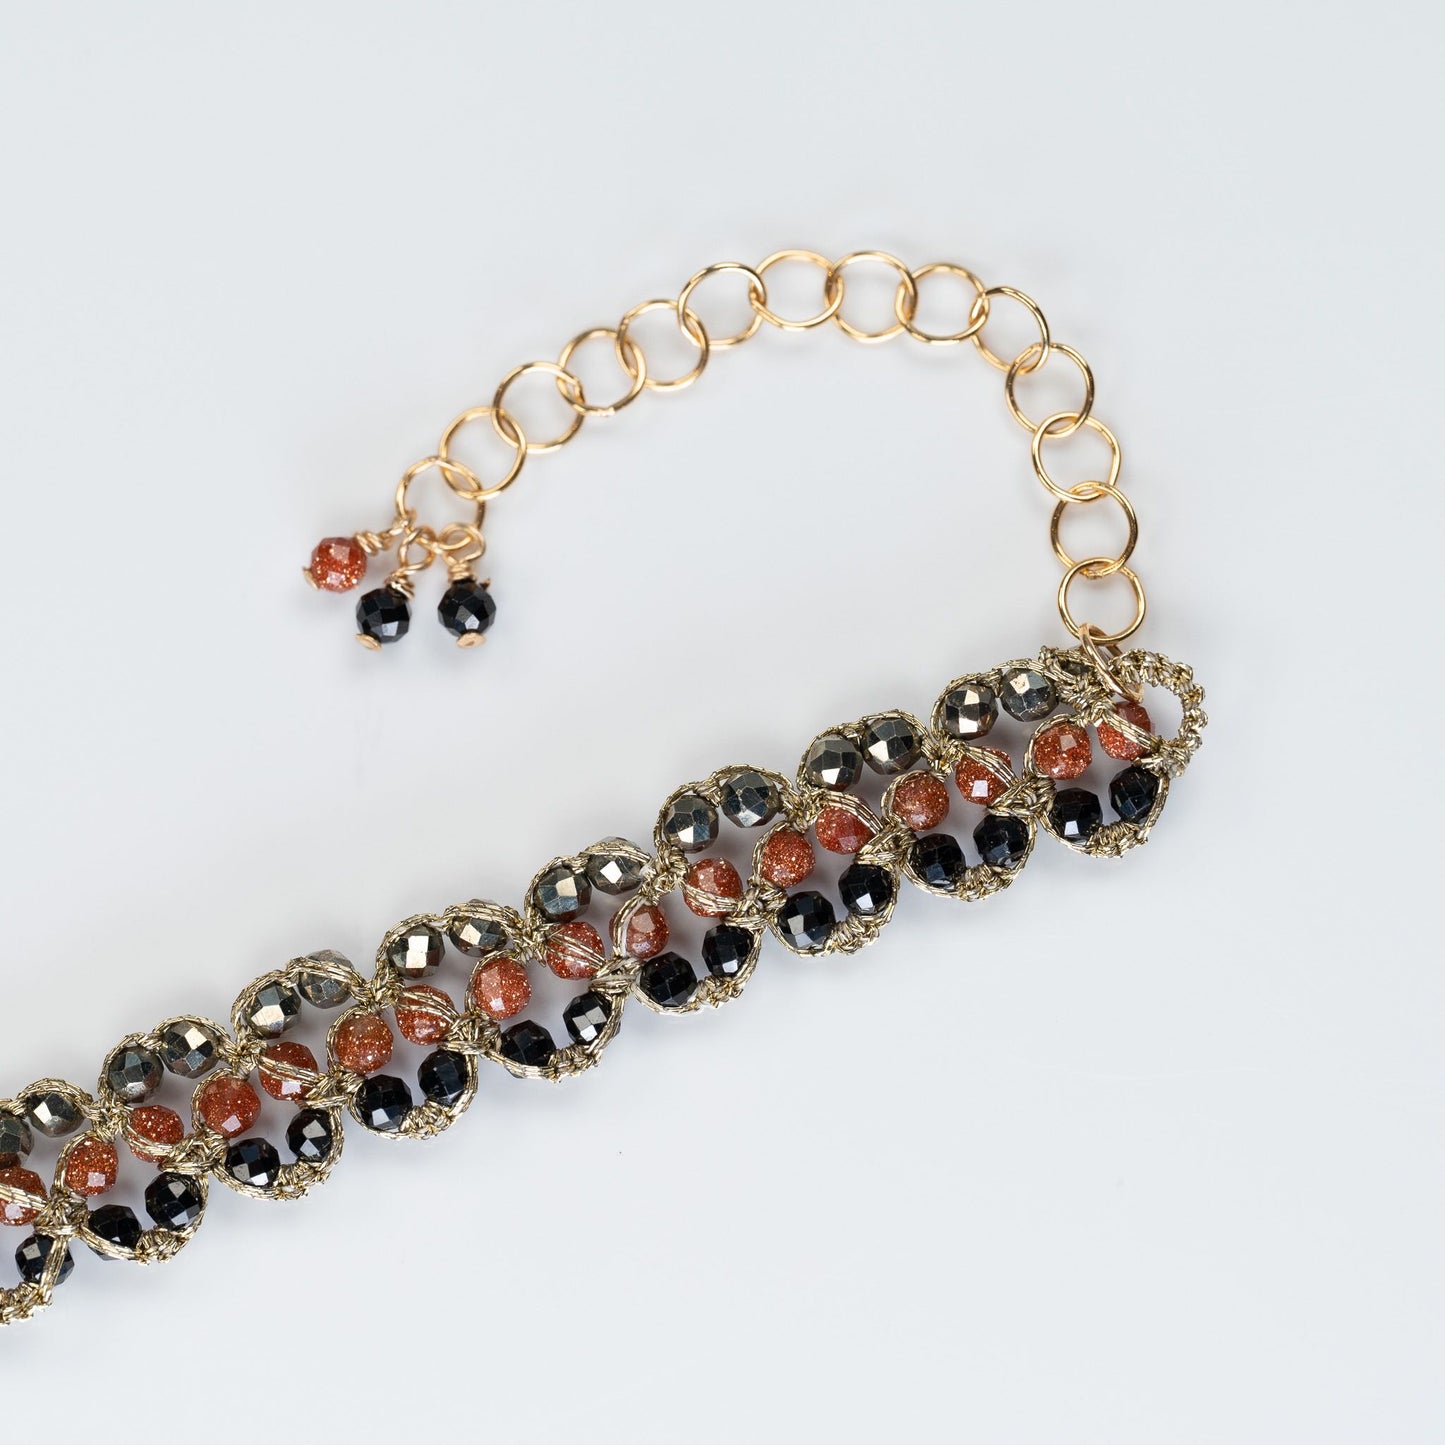 Load image into Gallery viewer, Woven Pyrite, Spinel and Sunstone Lace Bracelet
